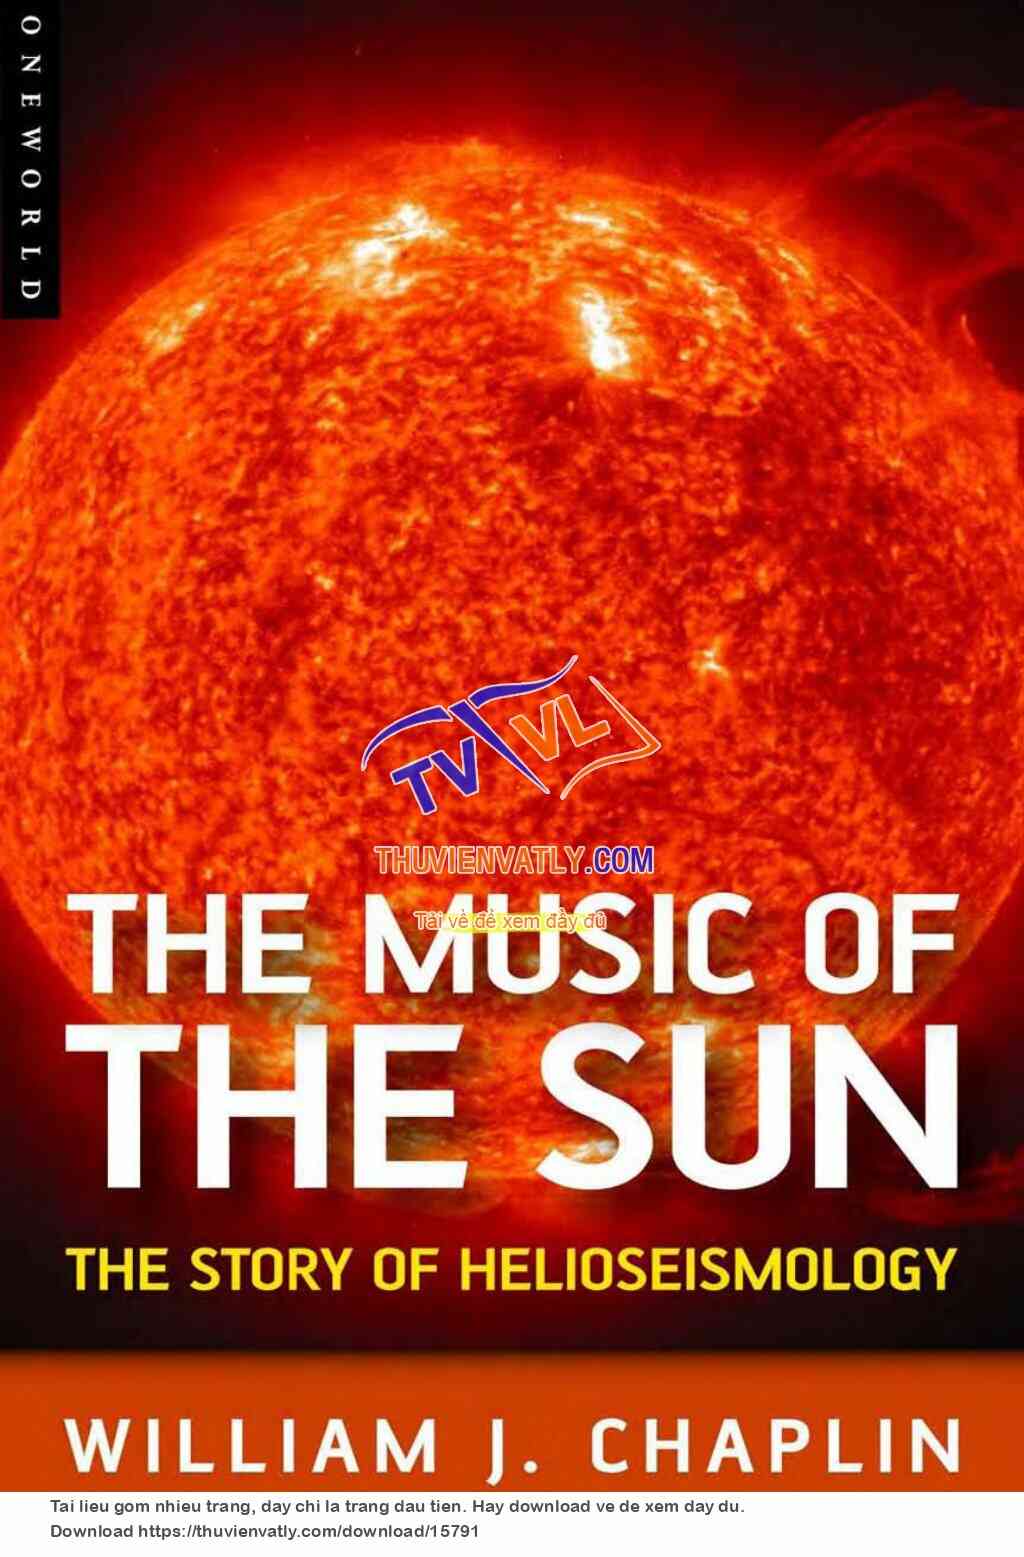 The Music of the Sun - The Story of Helioseismology (William J. Chaplin, Oneworld Publications 2006)